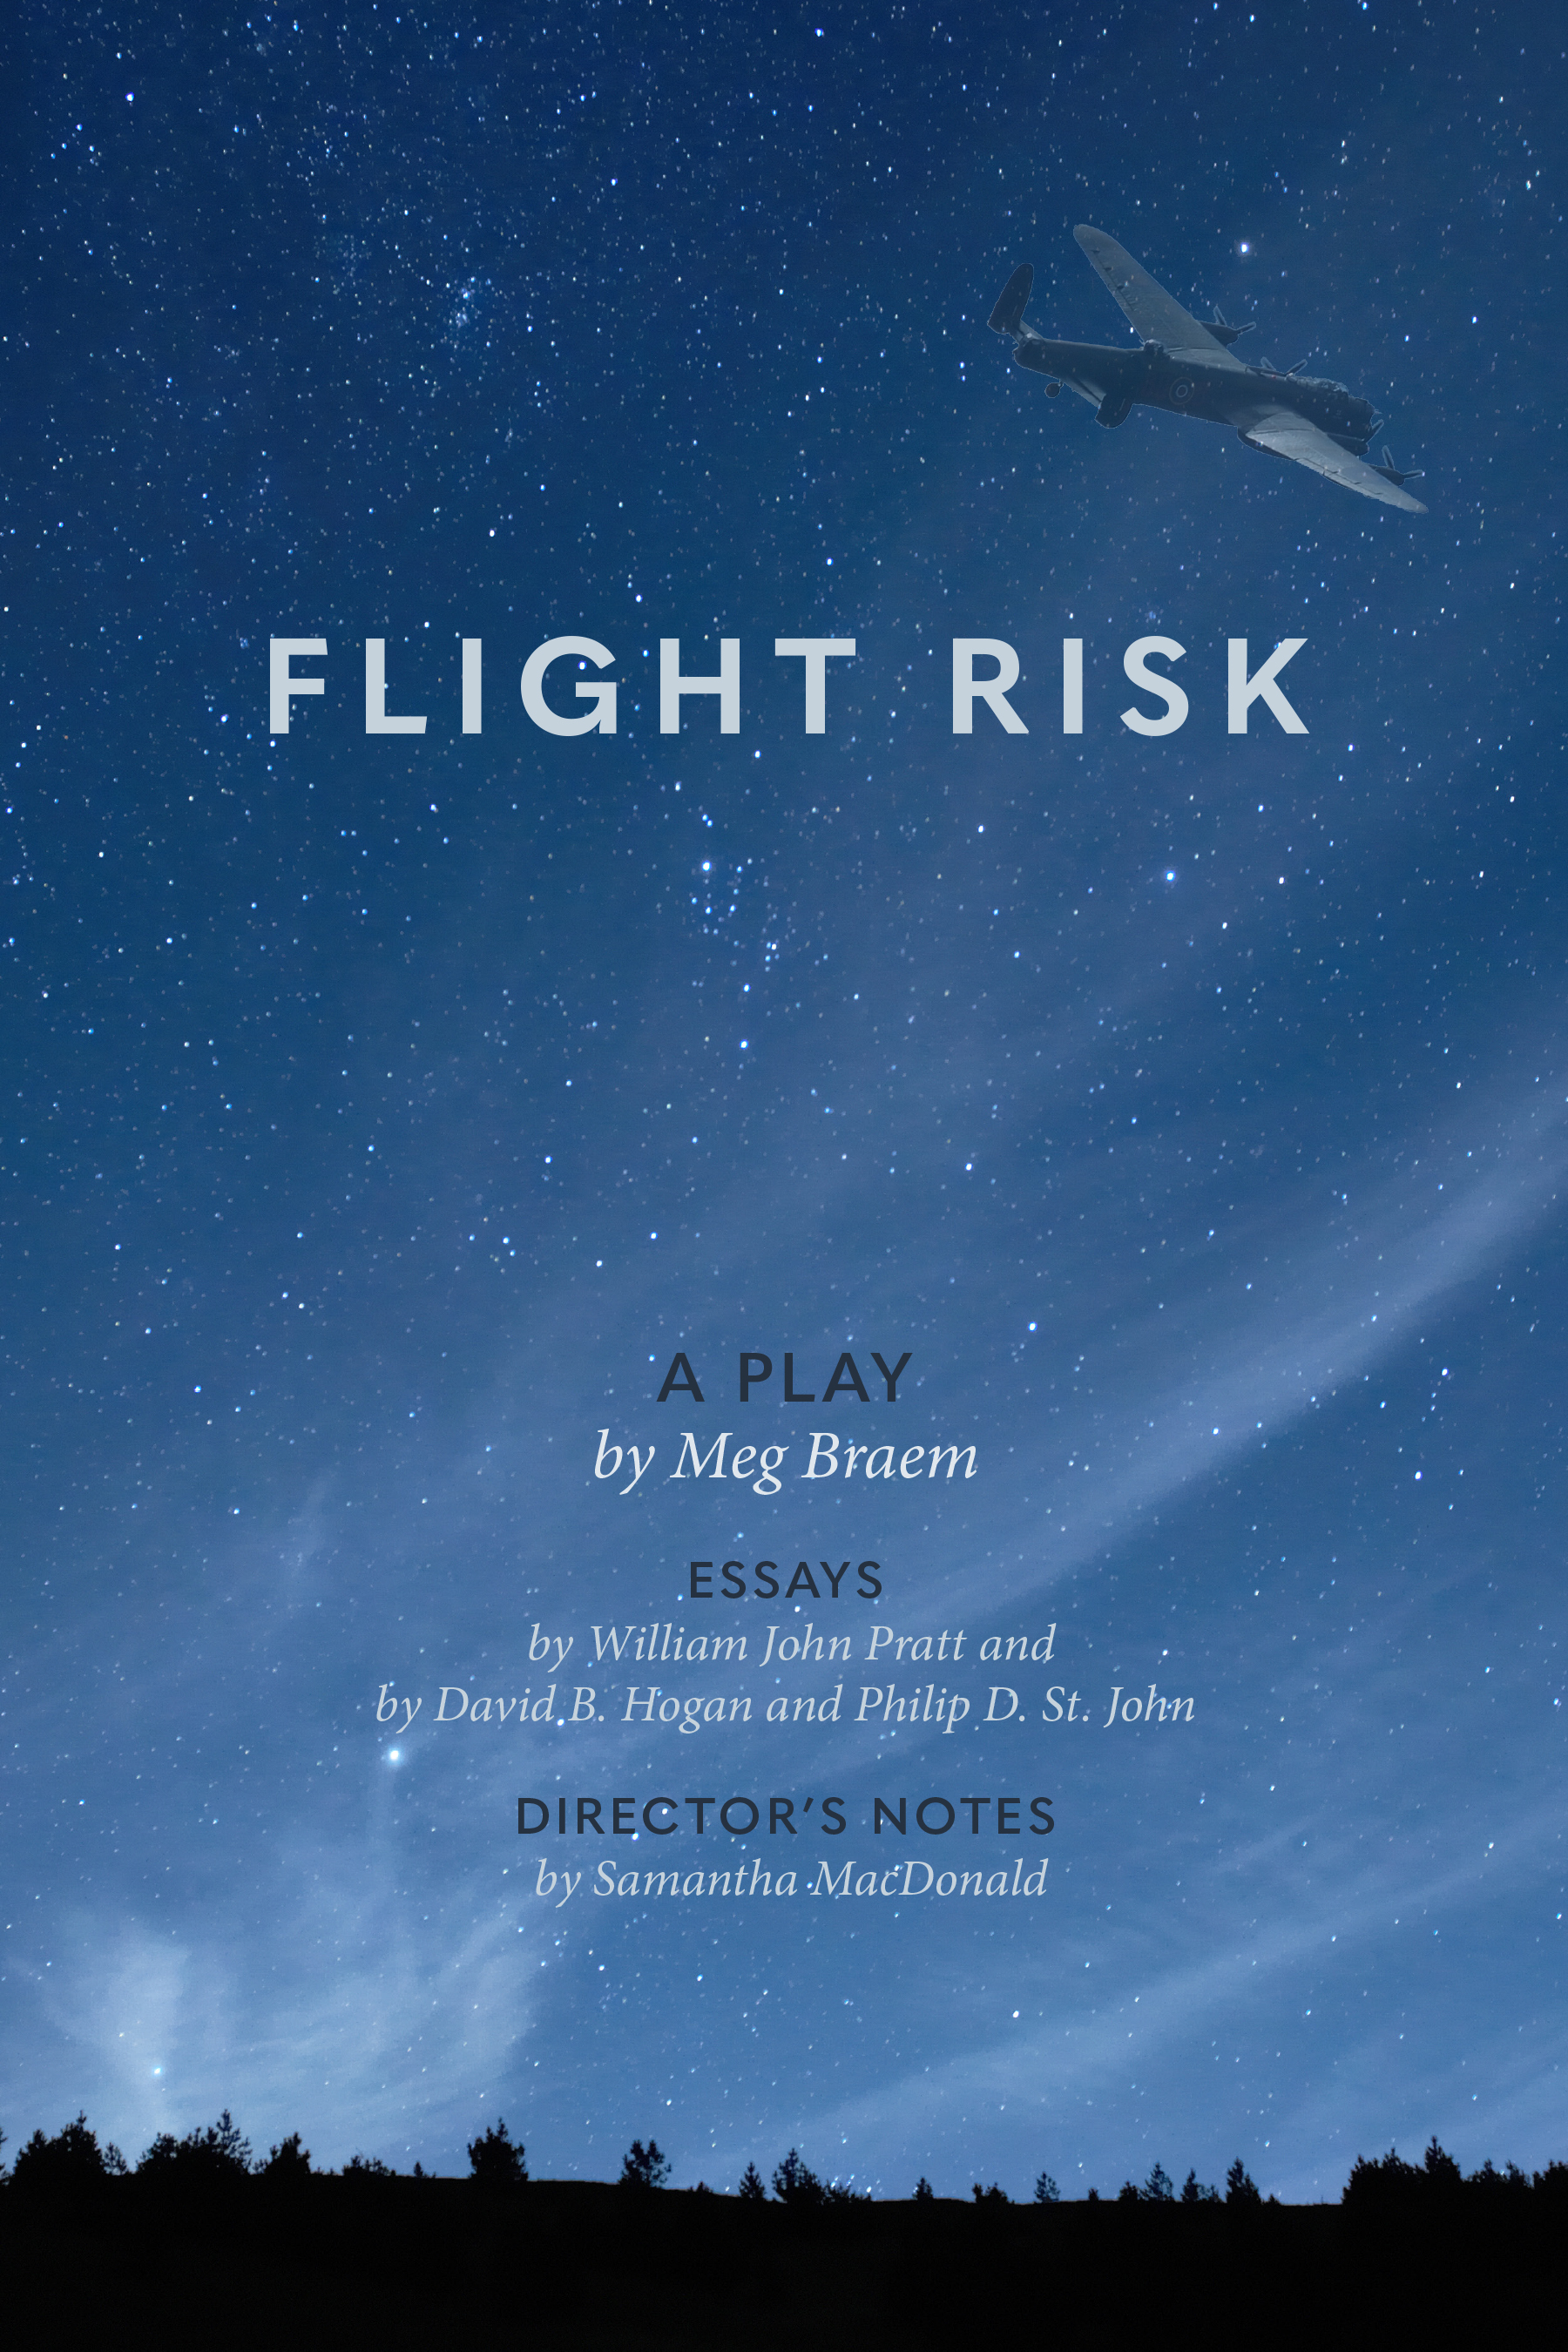 Book Cover Image for: Flight Risk